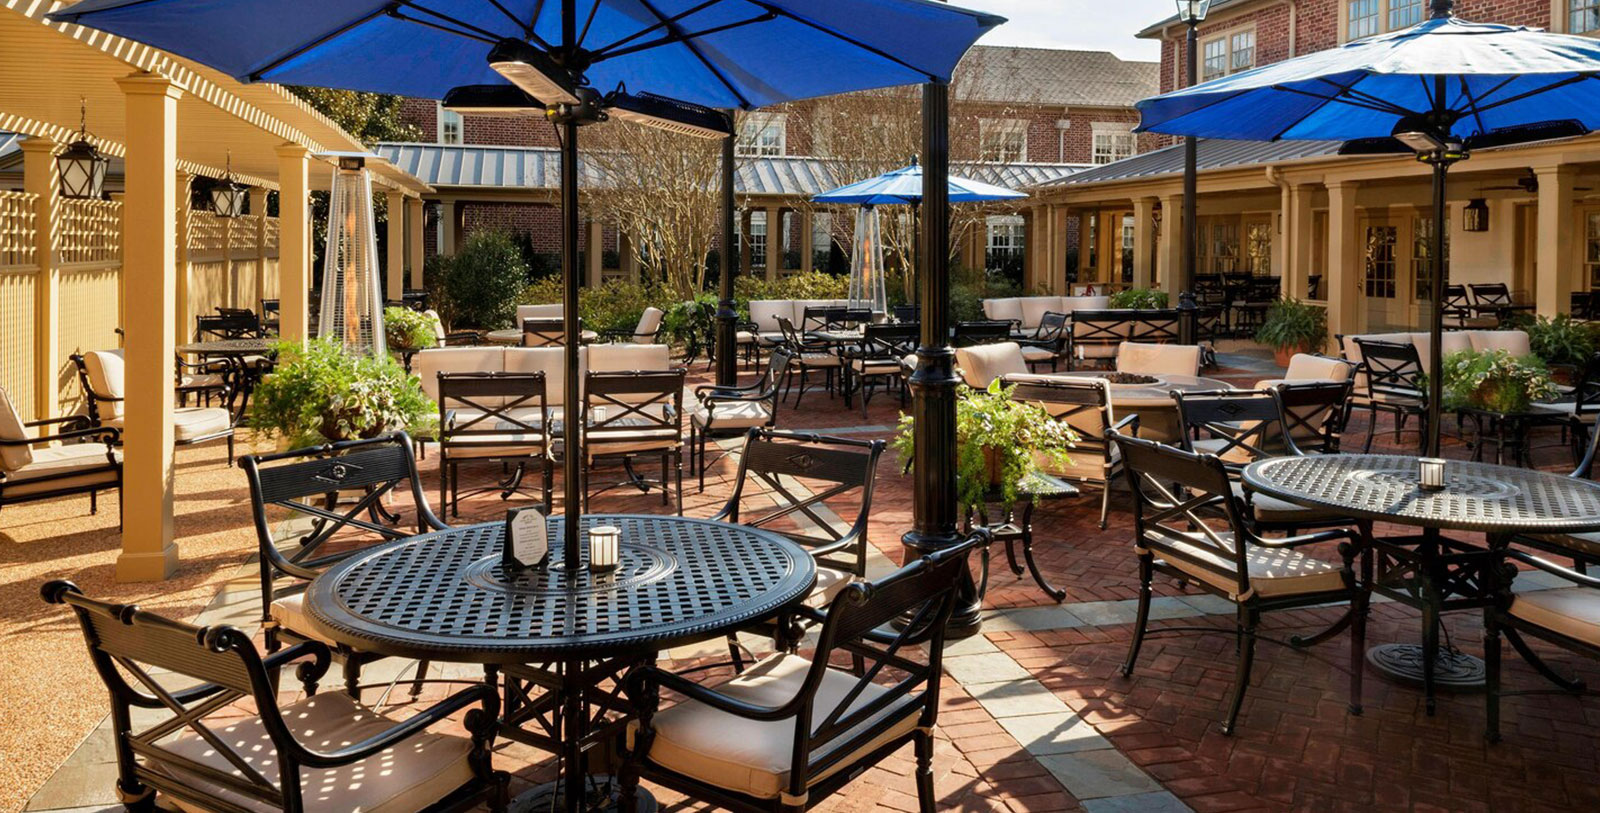 Image of Sweet Tea & Barley Outdoor Seating at Williamsburg Lodge, Autograph Collection, and Colonial Houses, 1750, Member of Historic Hotels of America, in Williamsburg Virginia, Taste